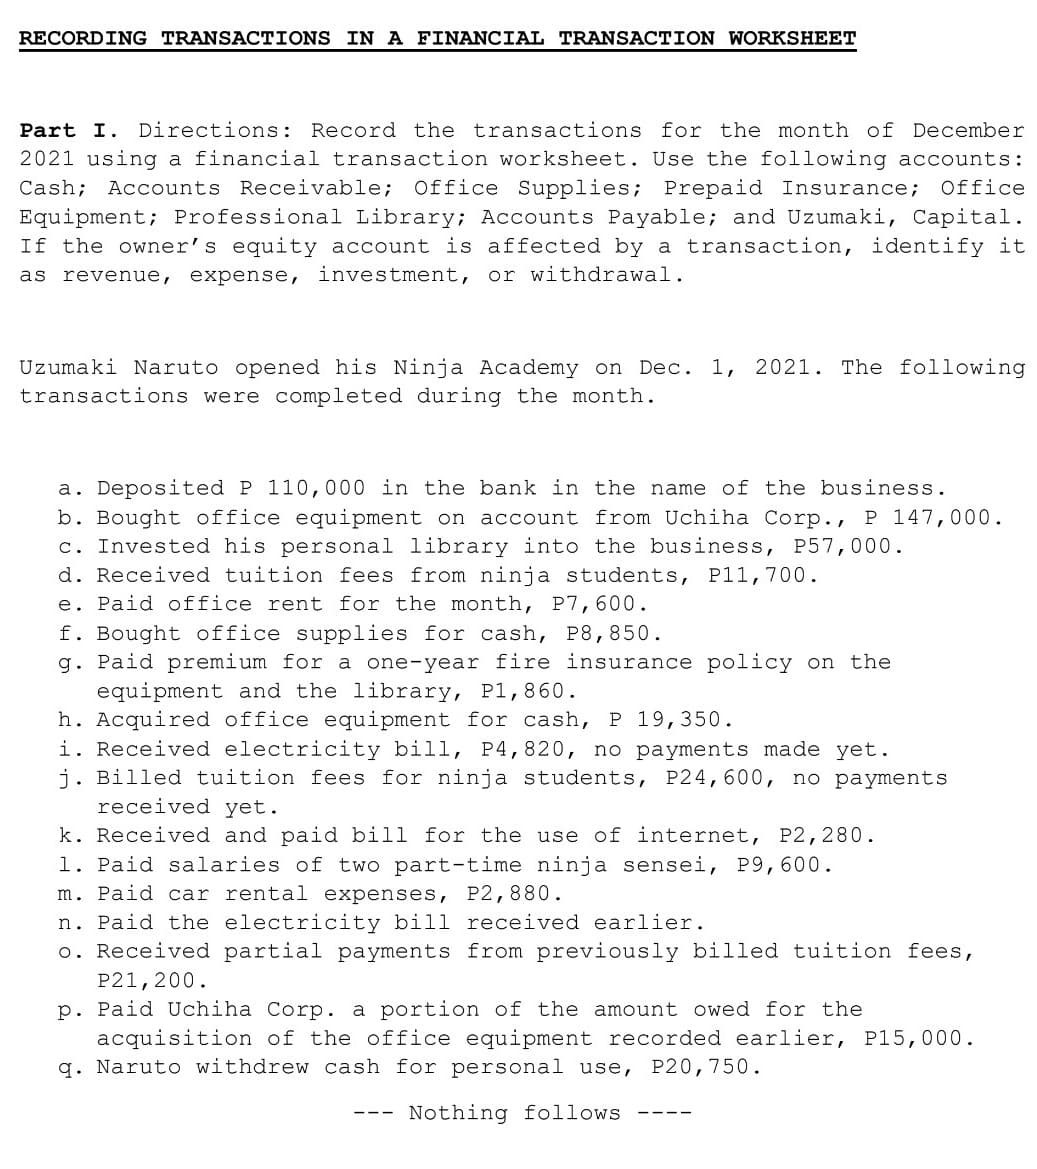 RECORDING TRANSACTIONS IN A FINANCIAL TRANSACTION WORKSHEET
Part I. Directions: Record the transactions for the month of December
2021 using a financial transaction worksheet. Use the following accounts:
Cash; Accounts Receivable; Office Supplies; Prepaid Insurance;
Equipment; Professional Library; Accounts Payable; and Uzumaki, Capital.
If the owner's equity account is affected by a transaction, identify it
Office
as revenue, expense, investment, or withdrawal.
Uzumaki Naruto opened his Ninja Academy on Dec. 1, 2021. The following
transactions were completed during the month.
a. Deposited P 110,000 in the bank in the name of the business.
b. Bought office equipment on account from Uchiha Corp., P 147,000.
c. Invested his personal library into the business, P57,000.
d. Received tuition fees from ninja students, Pl1,700.
e. Paid office rent for the month, P7,600.
f. Bought office supplies for cash, P8,850.
g. Paid premium for a one-year fire insurance policy on the
equipment and the library, P1,860.
h. Acquired office equipment for cash, P 19,350.
i. Received electricity bill, P4,820, no payments made yet.
j. Billed tuition fees for ninja students, P24,600, no payments
received yet.
k. Received and paid bill for the use of internet, P2,280.
1. Paid salaries of two part-time ninja sensei, P9,600.
m. Paid car rental expenses, P2,880.
n. Paid the electricity bill received earlier.
o. Received partial payments from previously billed tuition fees,
P21,200.
p. Paid Uchiha Corp. a portion of the amount owed for the
acquisition of the office equipment recorded earlier, P15,000.
q. Naruto withdrew cash for personal use, P20,750.
Nothing follows
-- -
